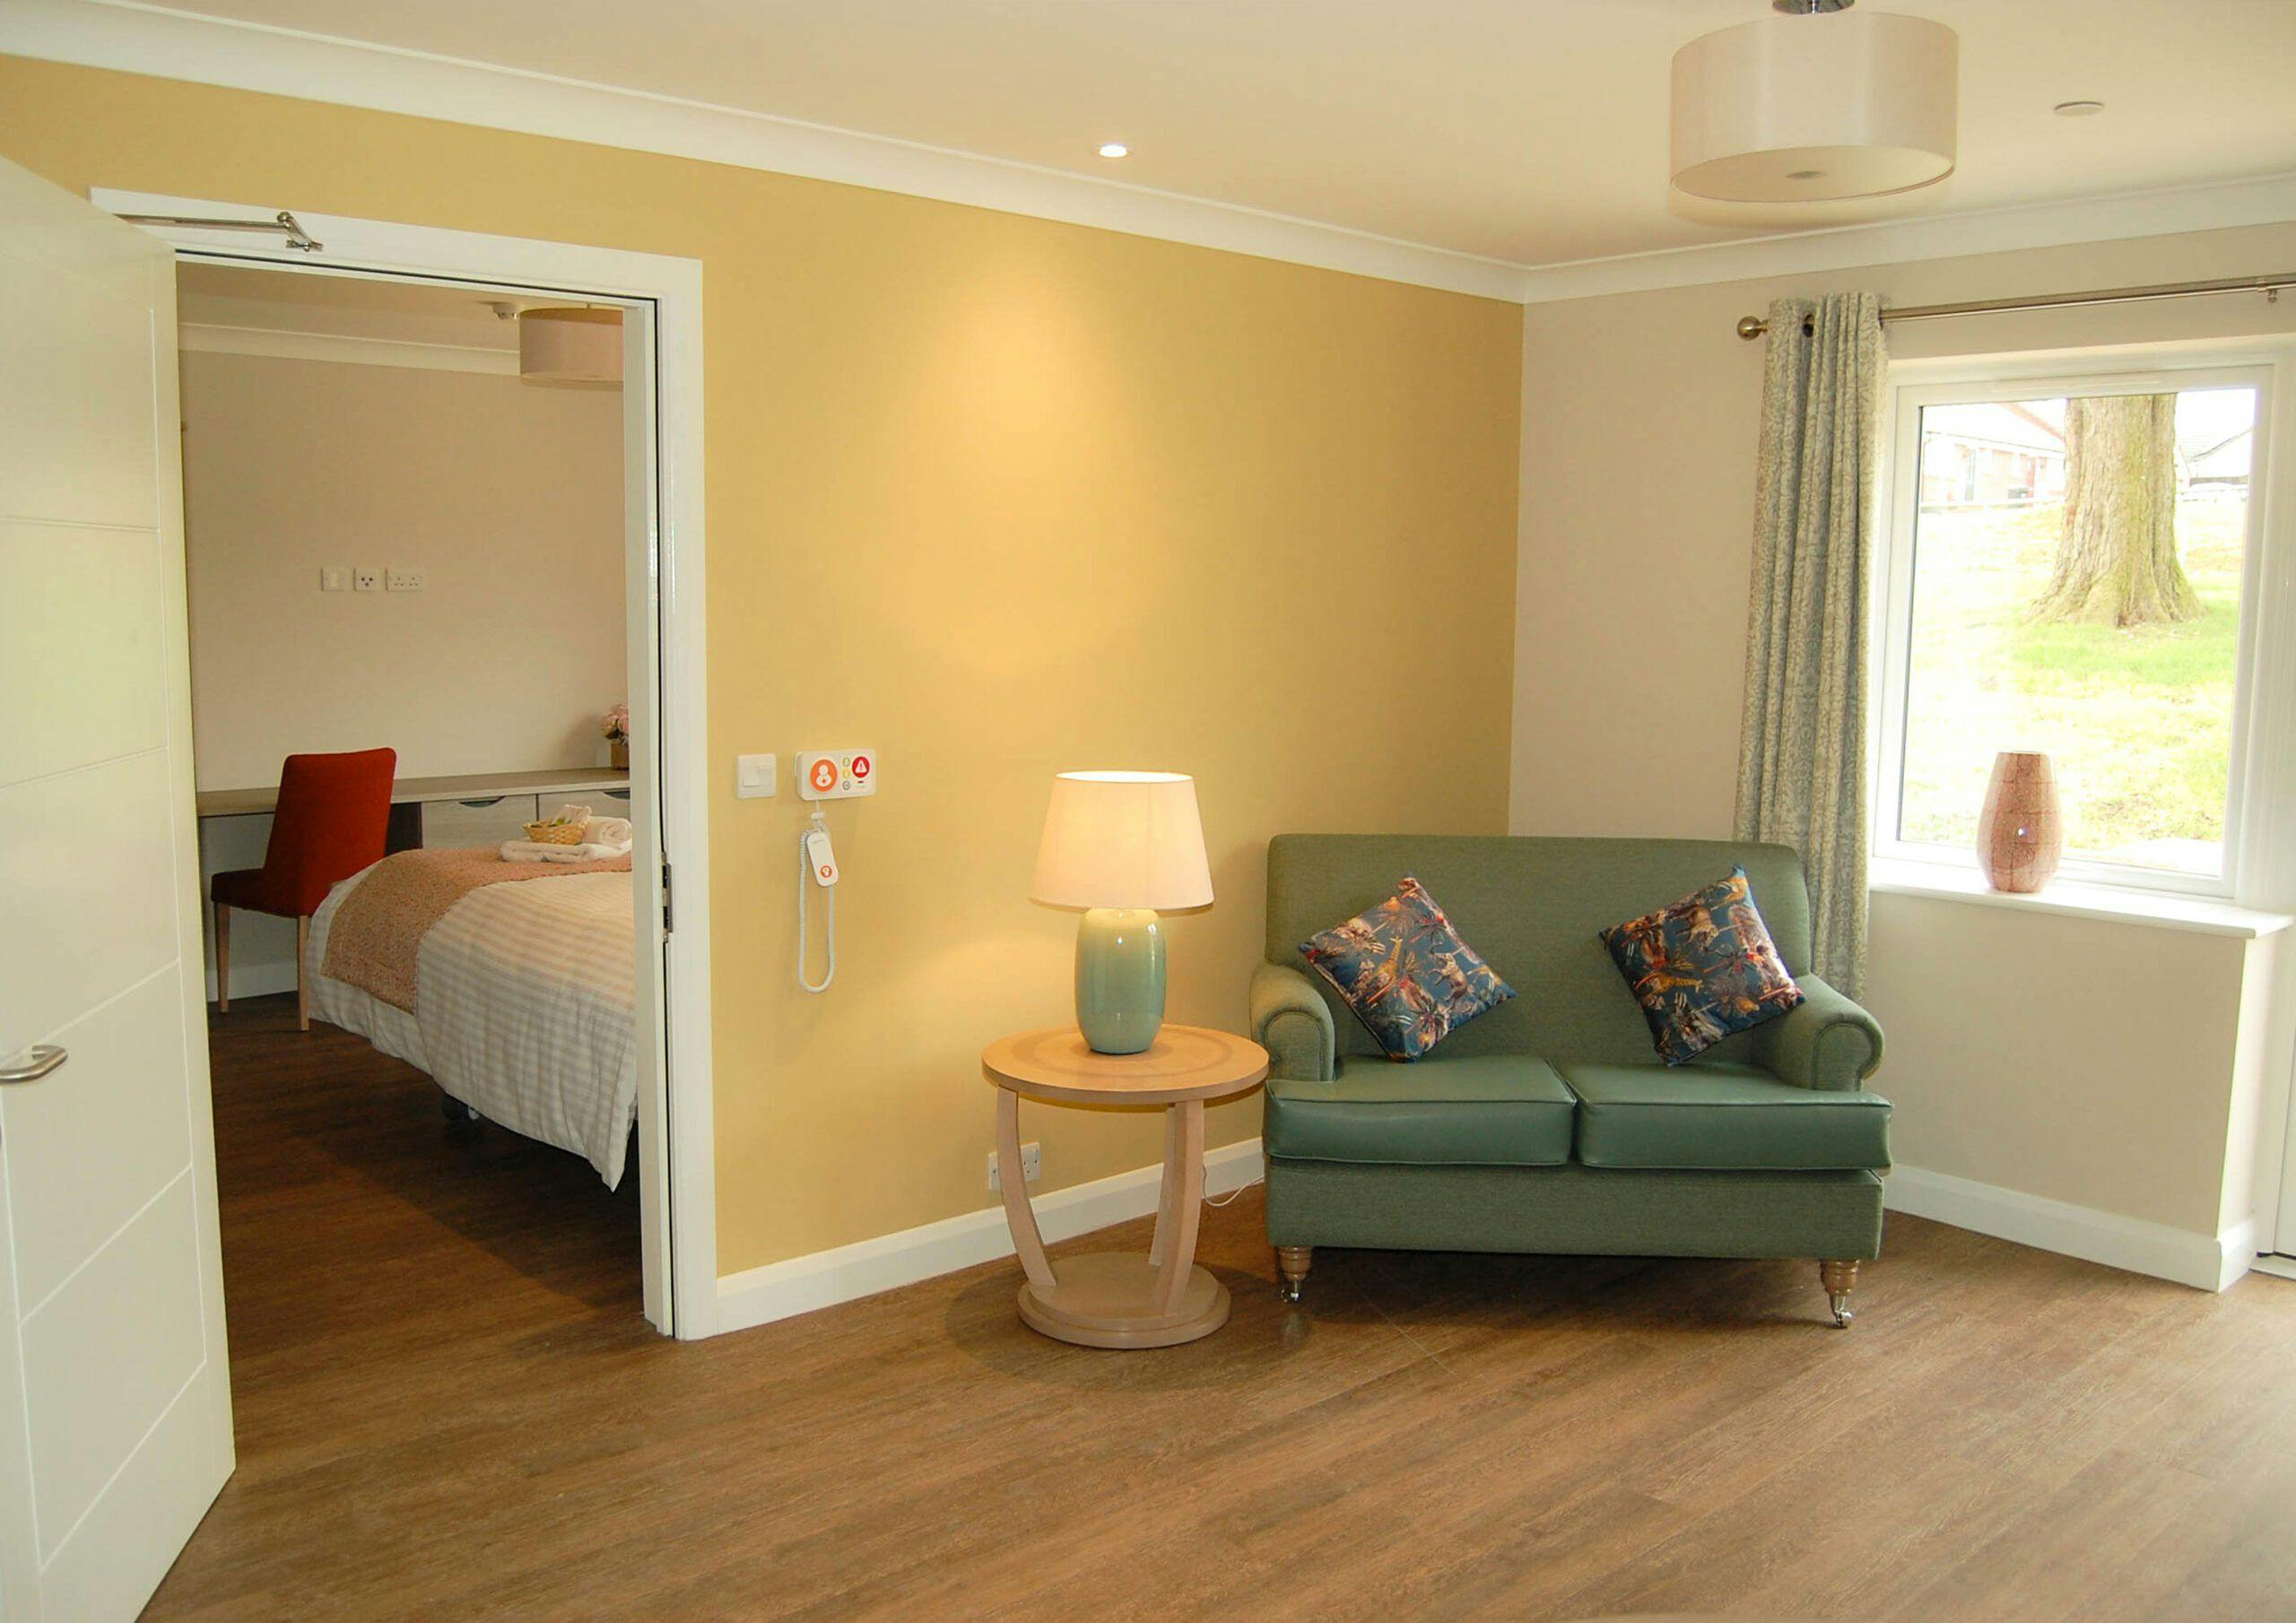 Bedroom of Thimbleby Court care home in Horncastle, Lincolnshire